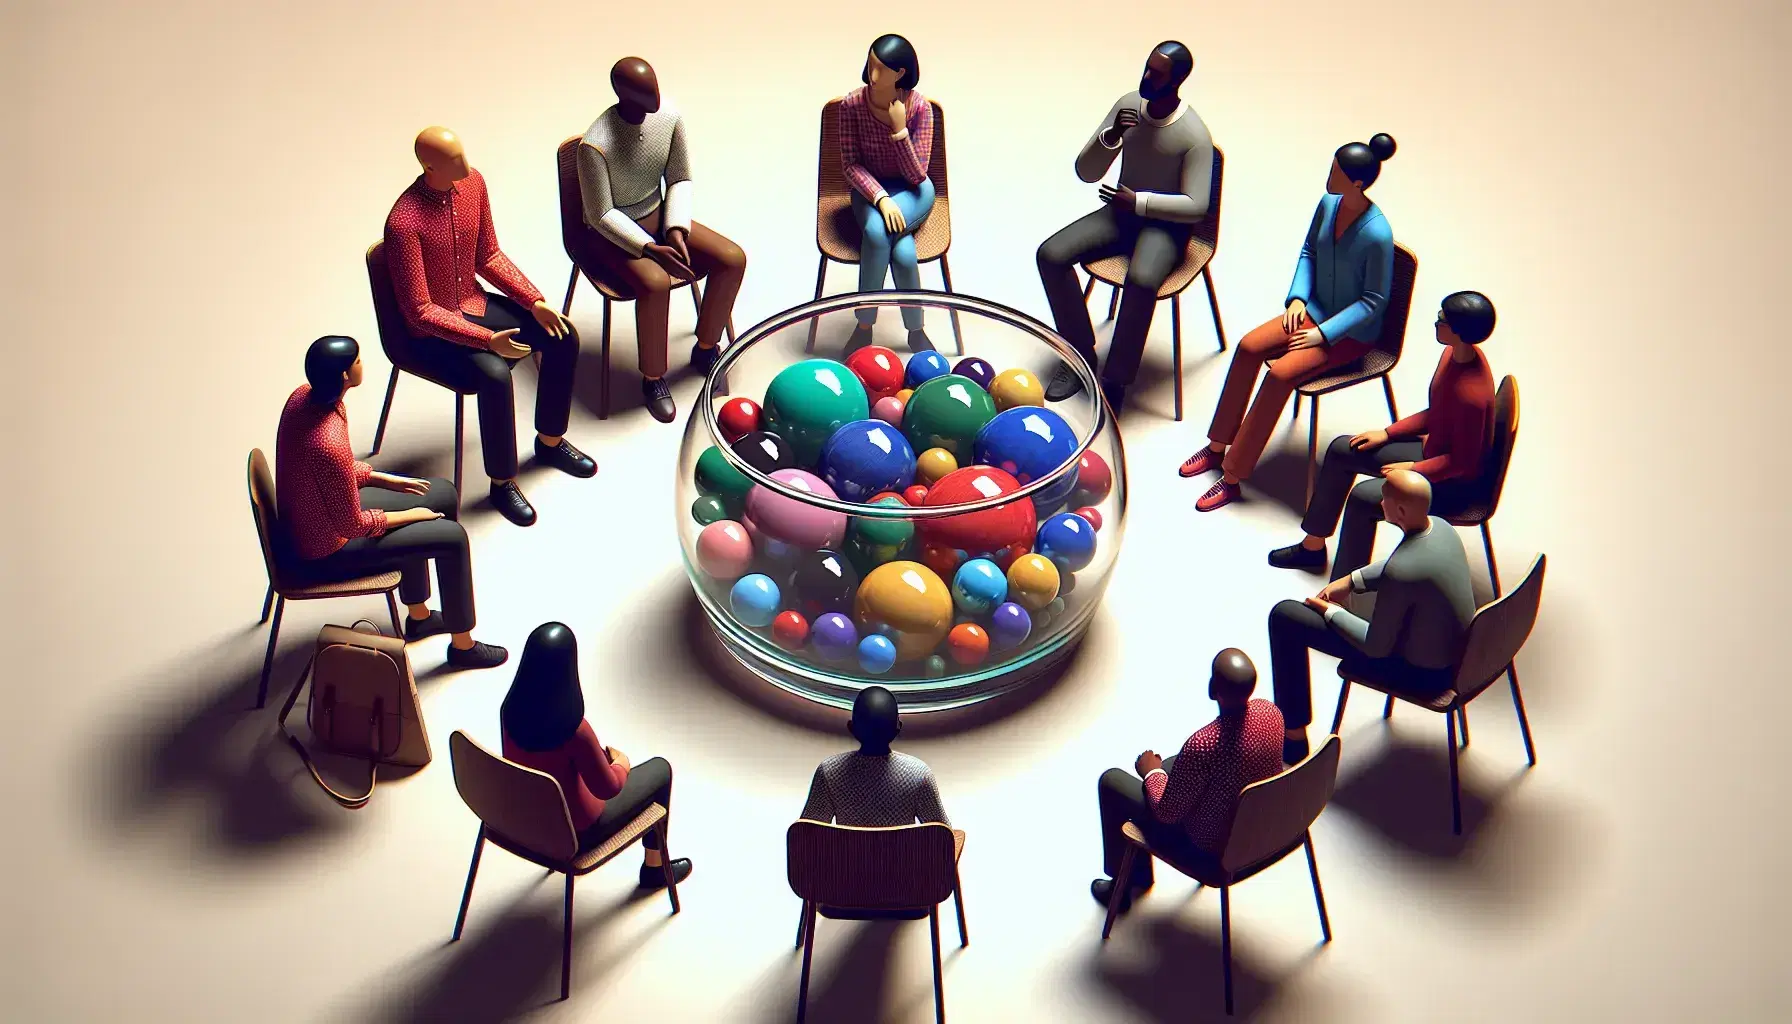 Multicultural group sitting in a semicircle actively discussing around a bowl of colored marbles, in an environment with soft lighting and neutral furnishings.